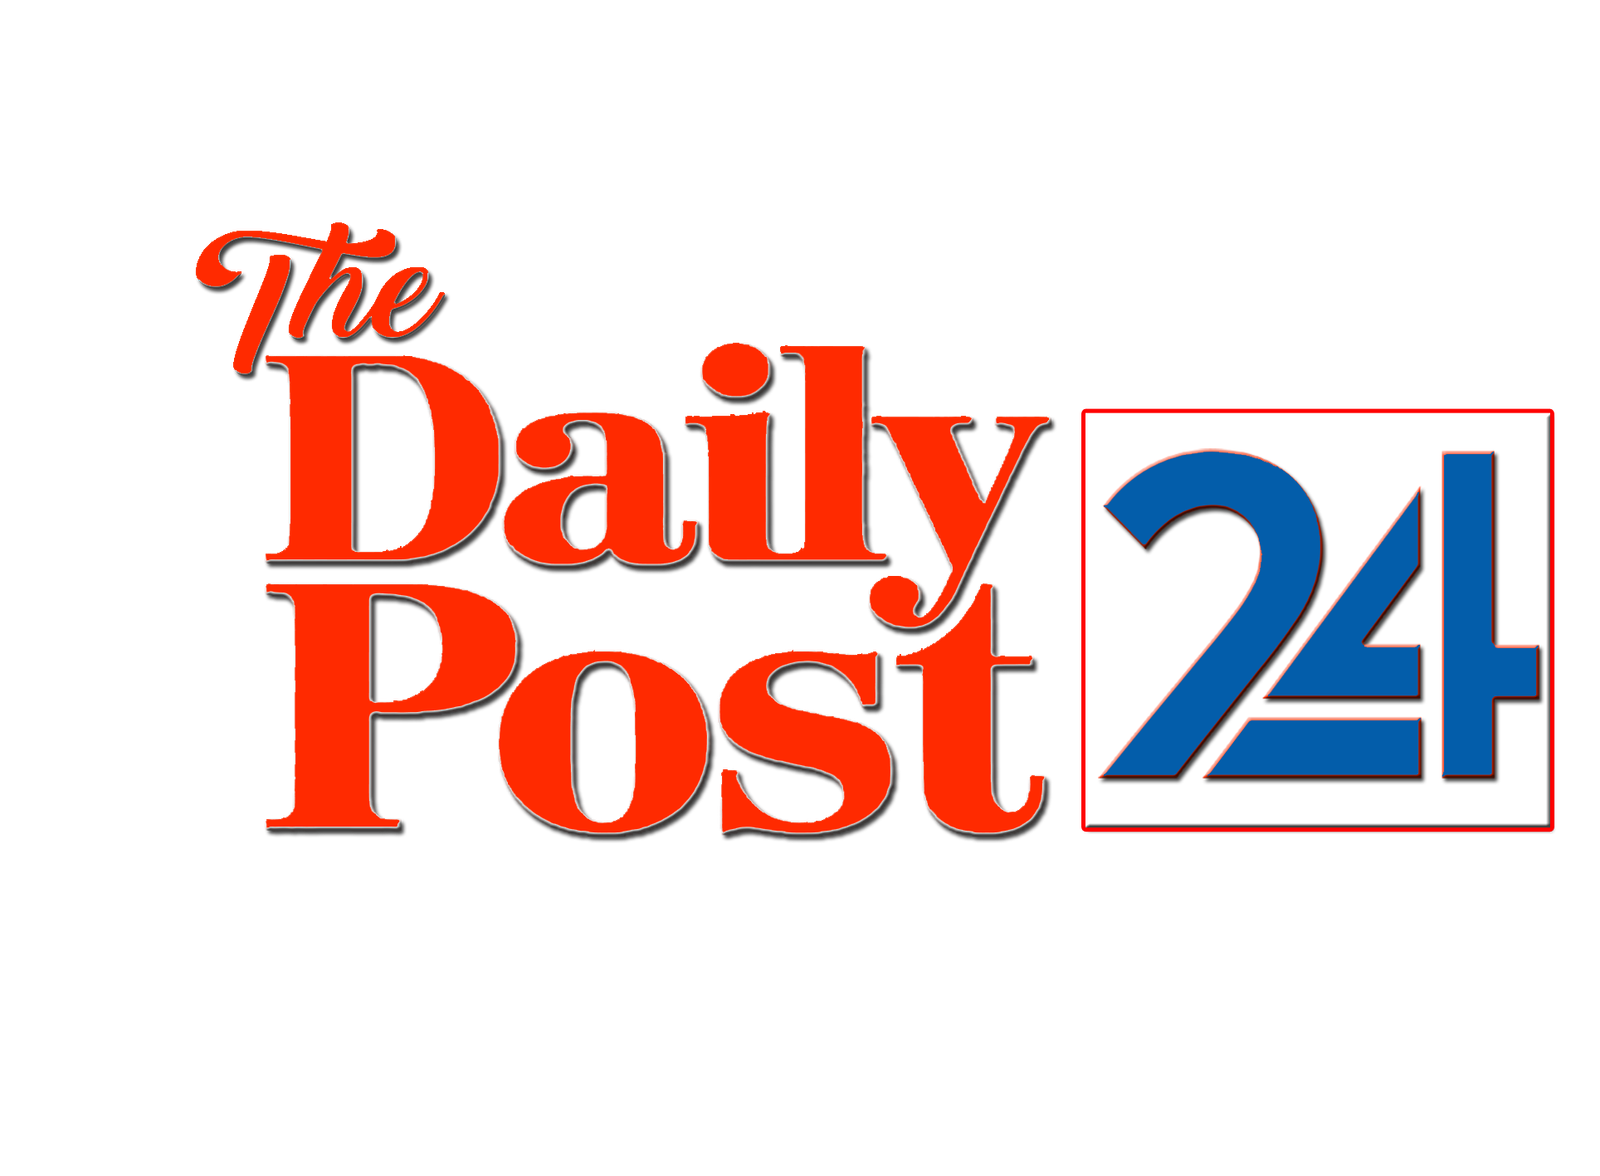 The Daily Post 24